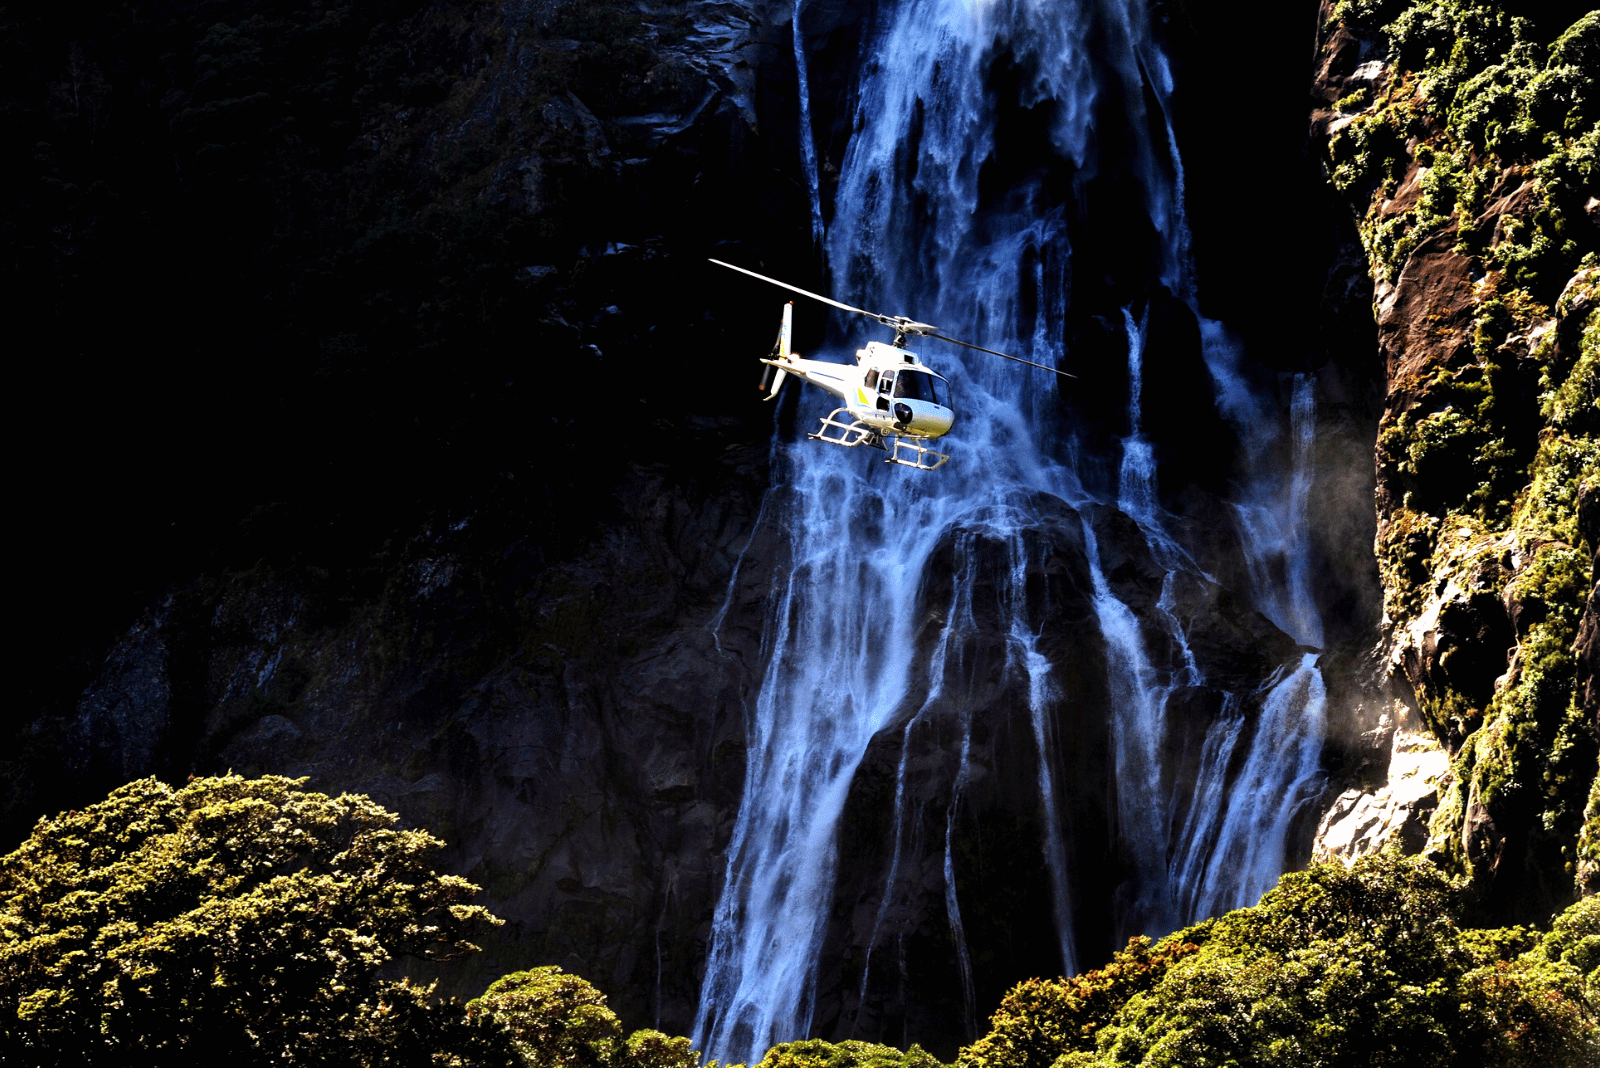 Helicopter over Milford Sound waterfall, New Zealand